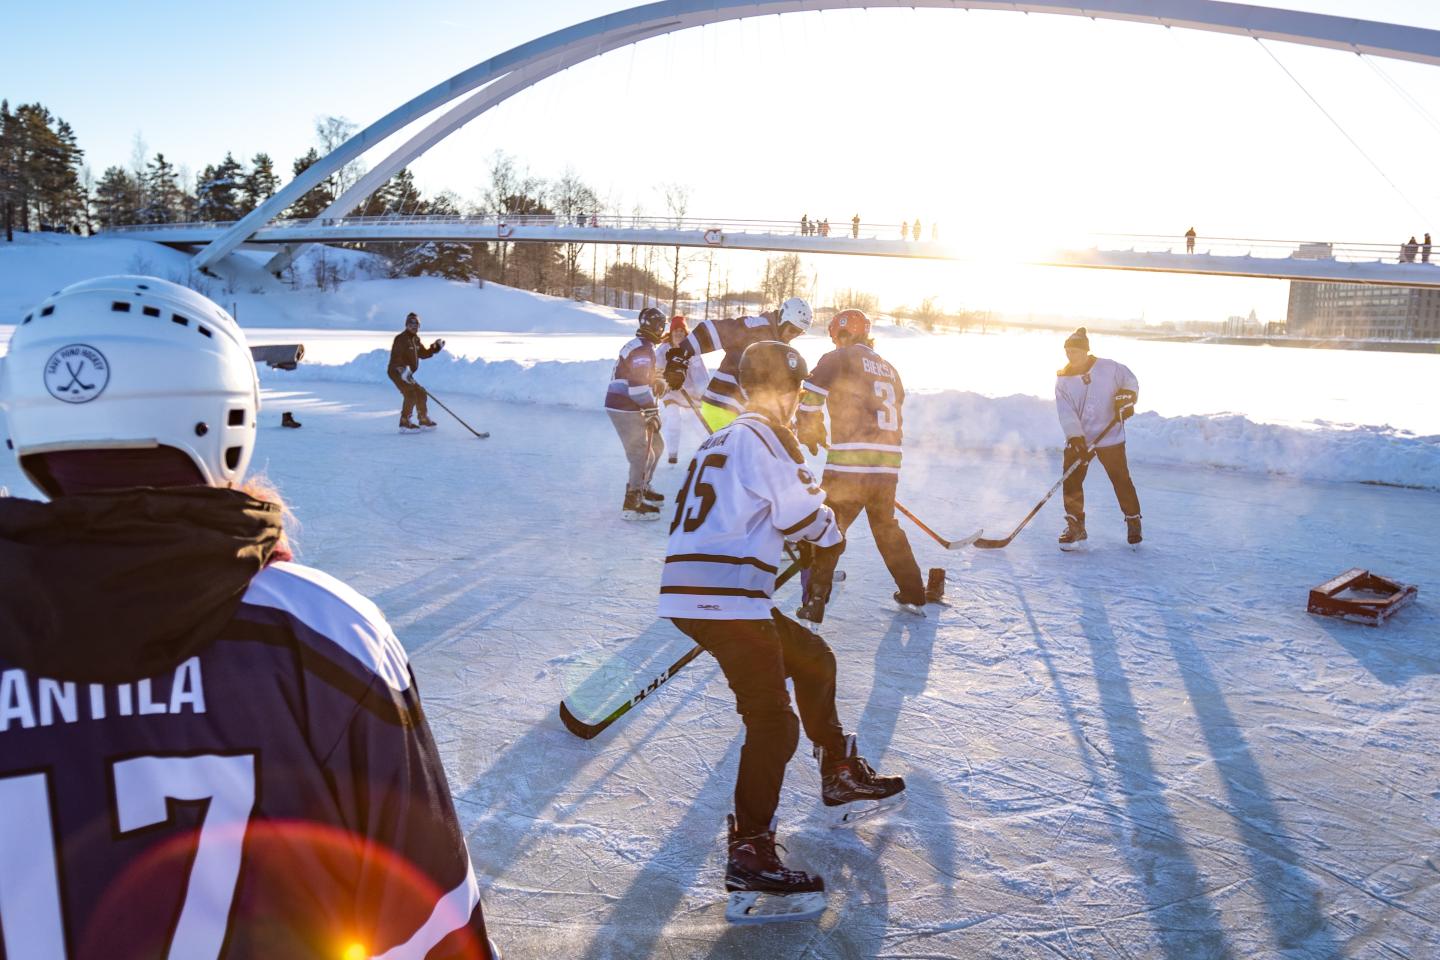 People playing hockey on a frozen pond outdoors